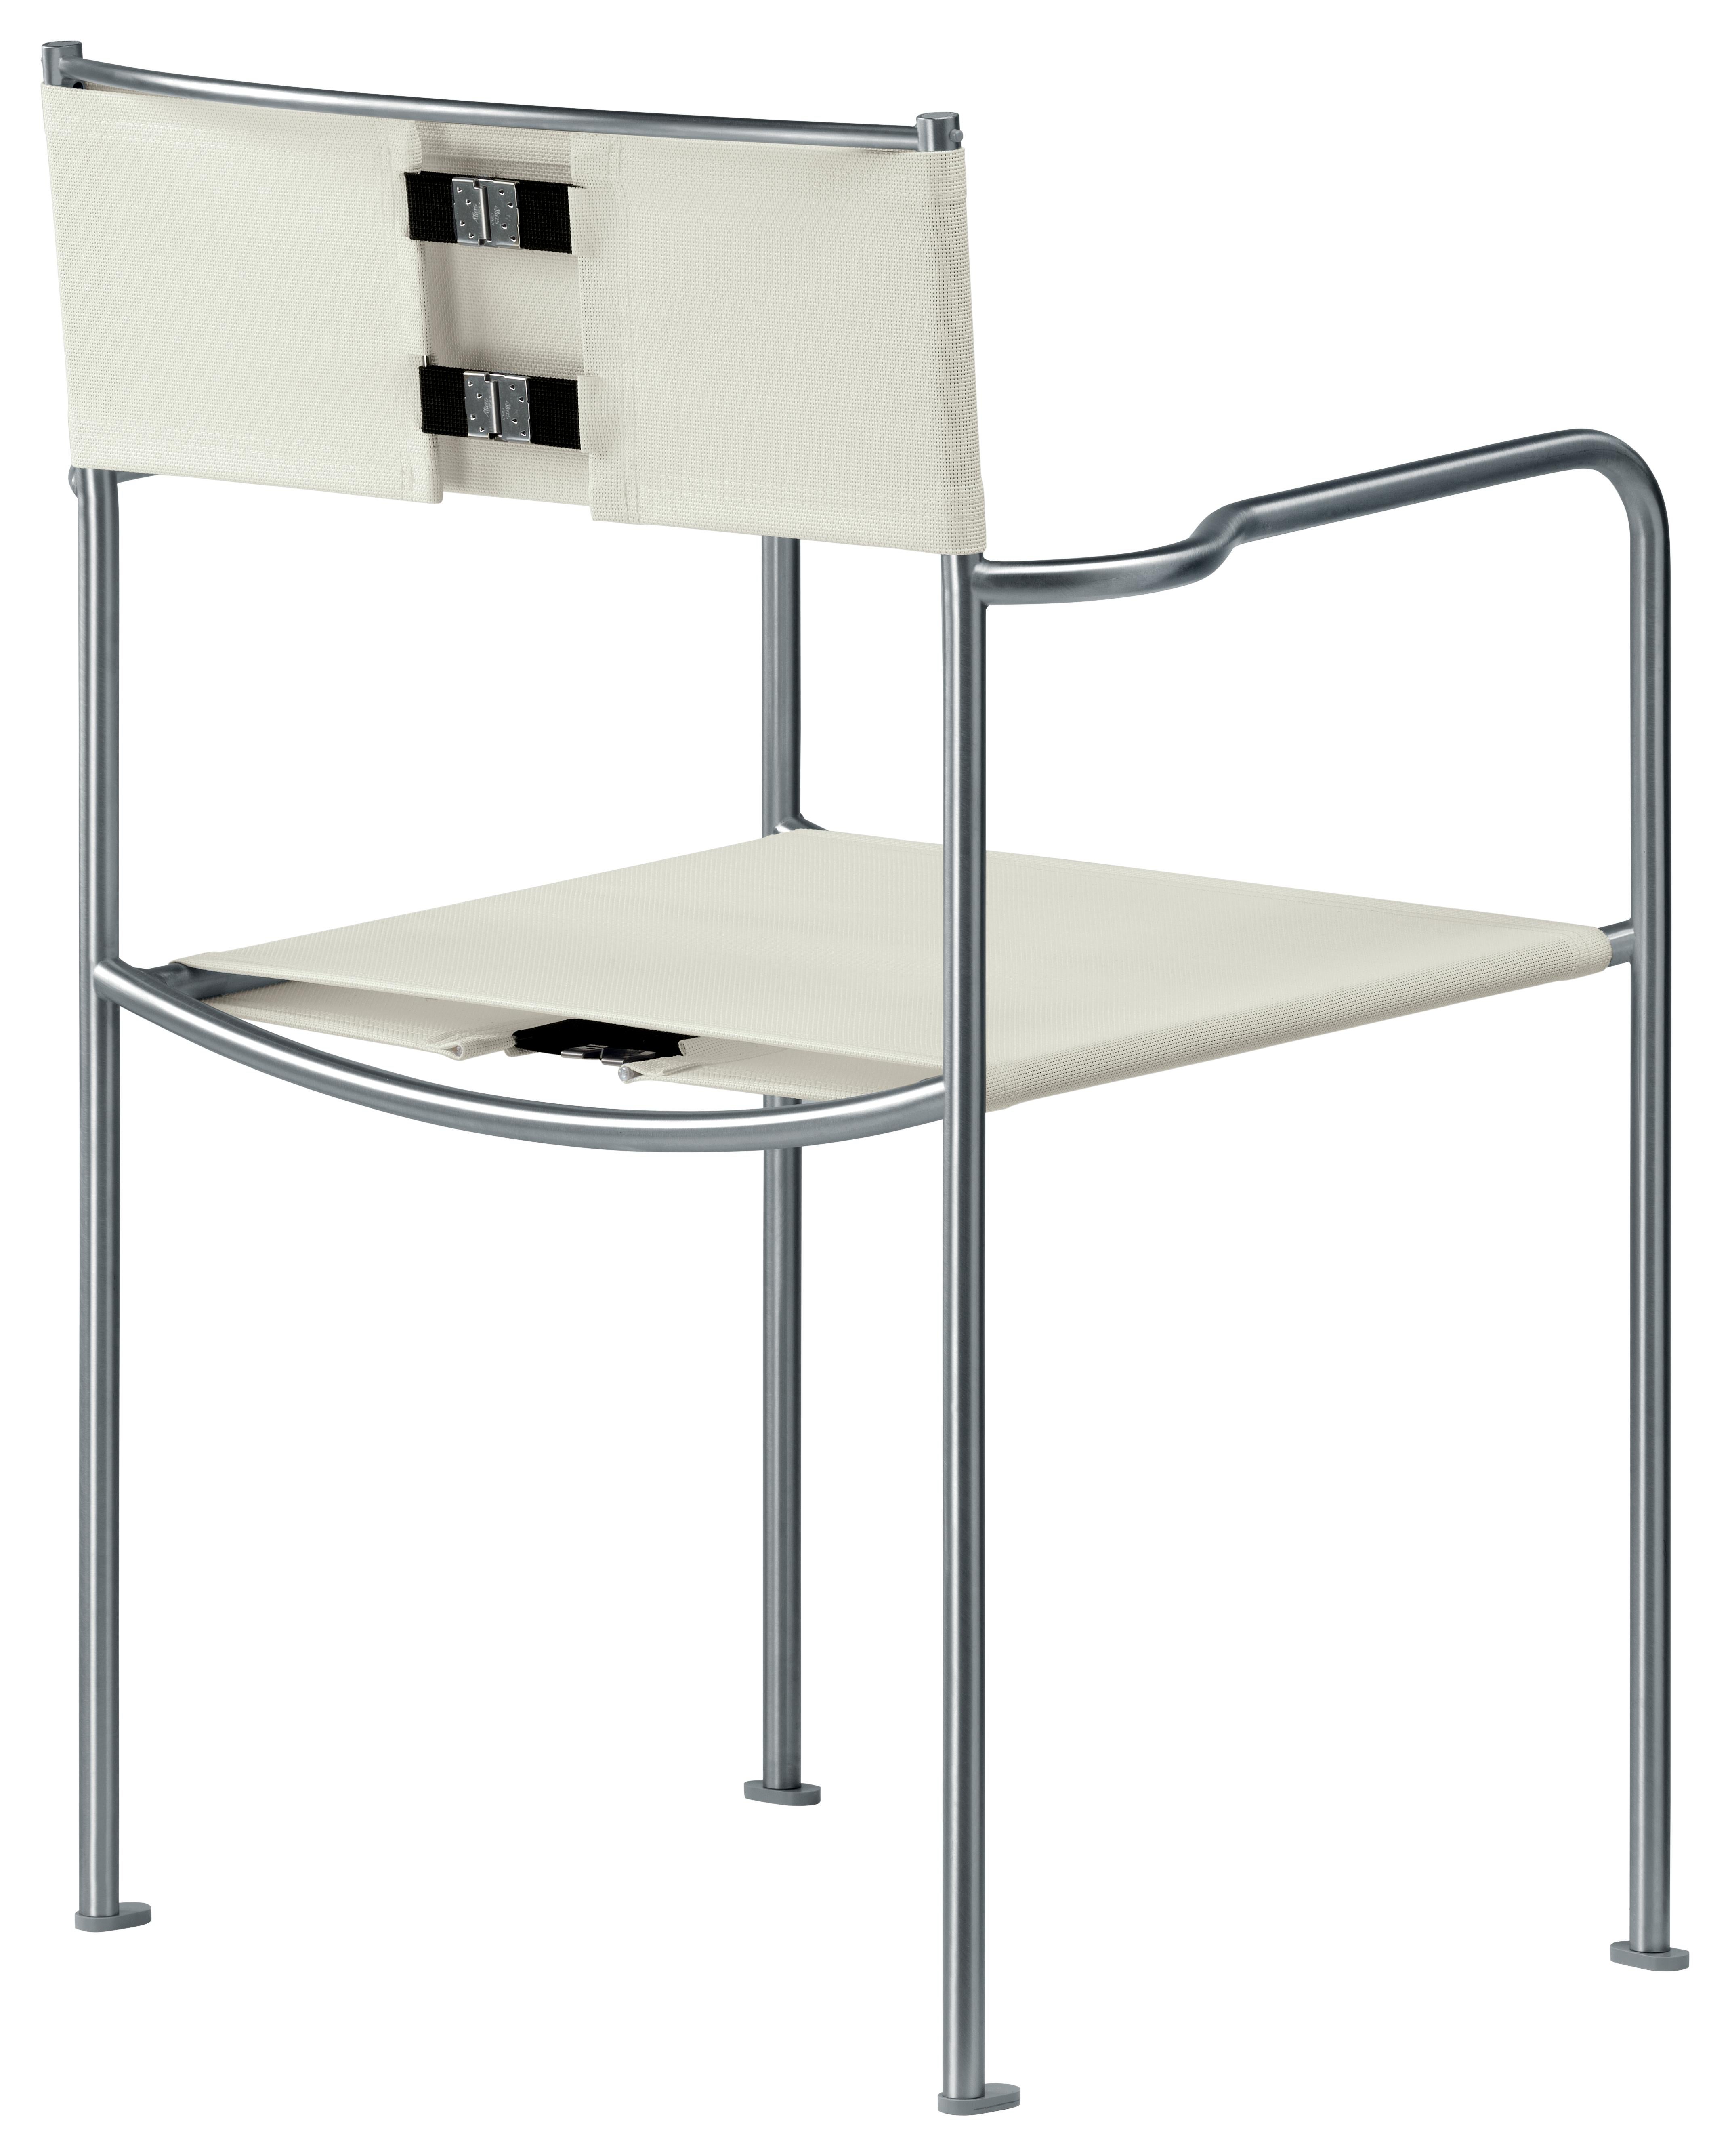 Alias 232_O Green Armrest in White Mesh with Steel Frame by Giandomenico Belotti

Stacking chair with arms for outdoor use, with structure in brushed stainless steel; seat and back in fire retardant PVC covered polyester mesh.

(1922-2004) After